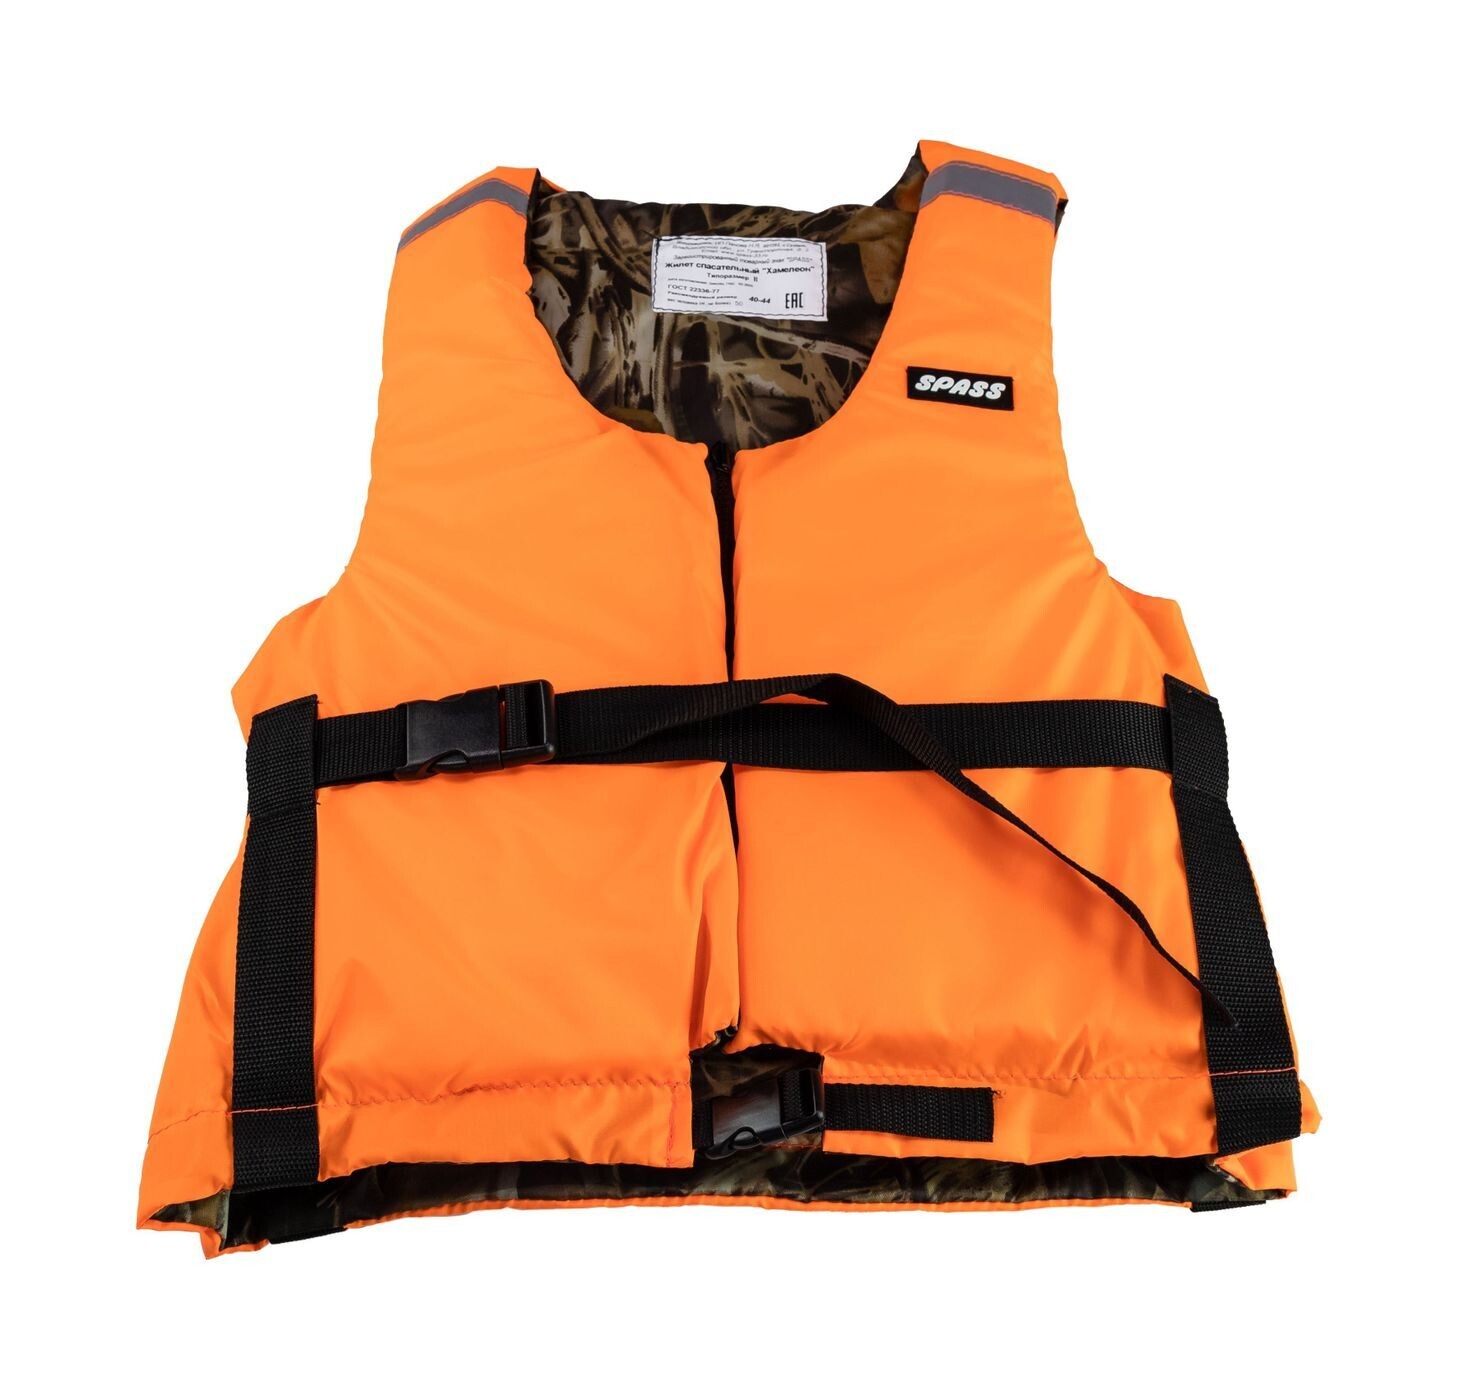 The Chameleon life jacket is double-sided